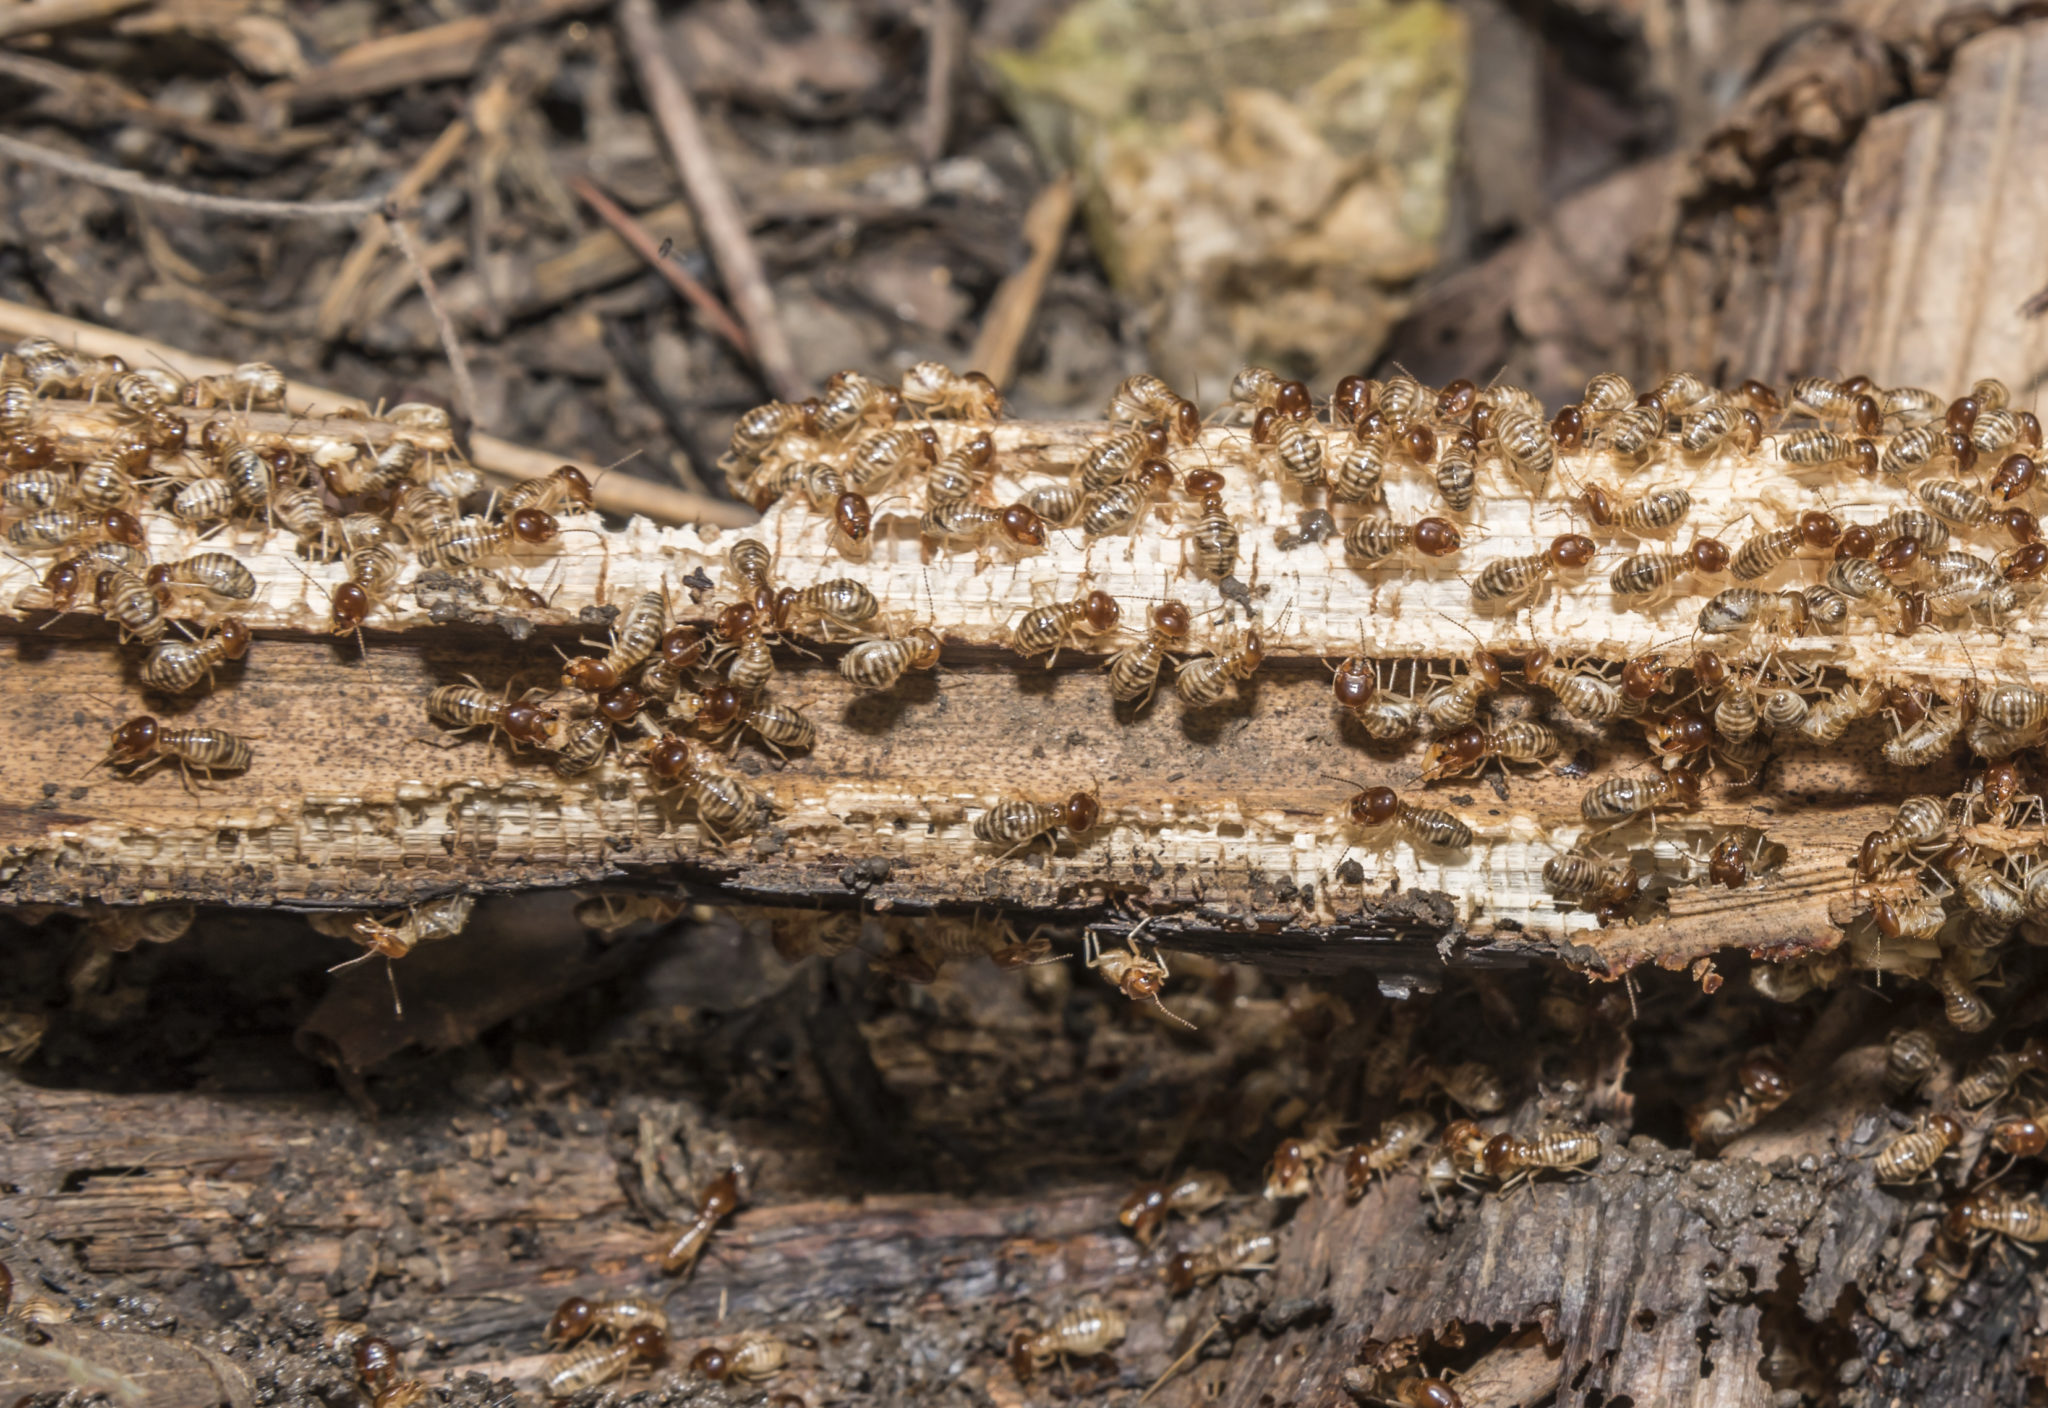 Townsville Termites Eating Wood